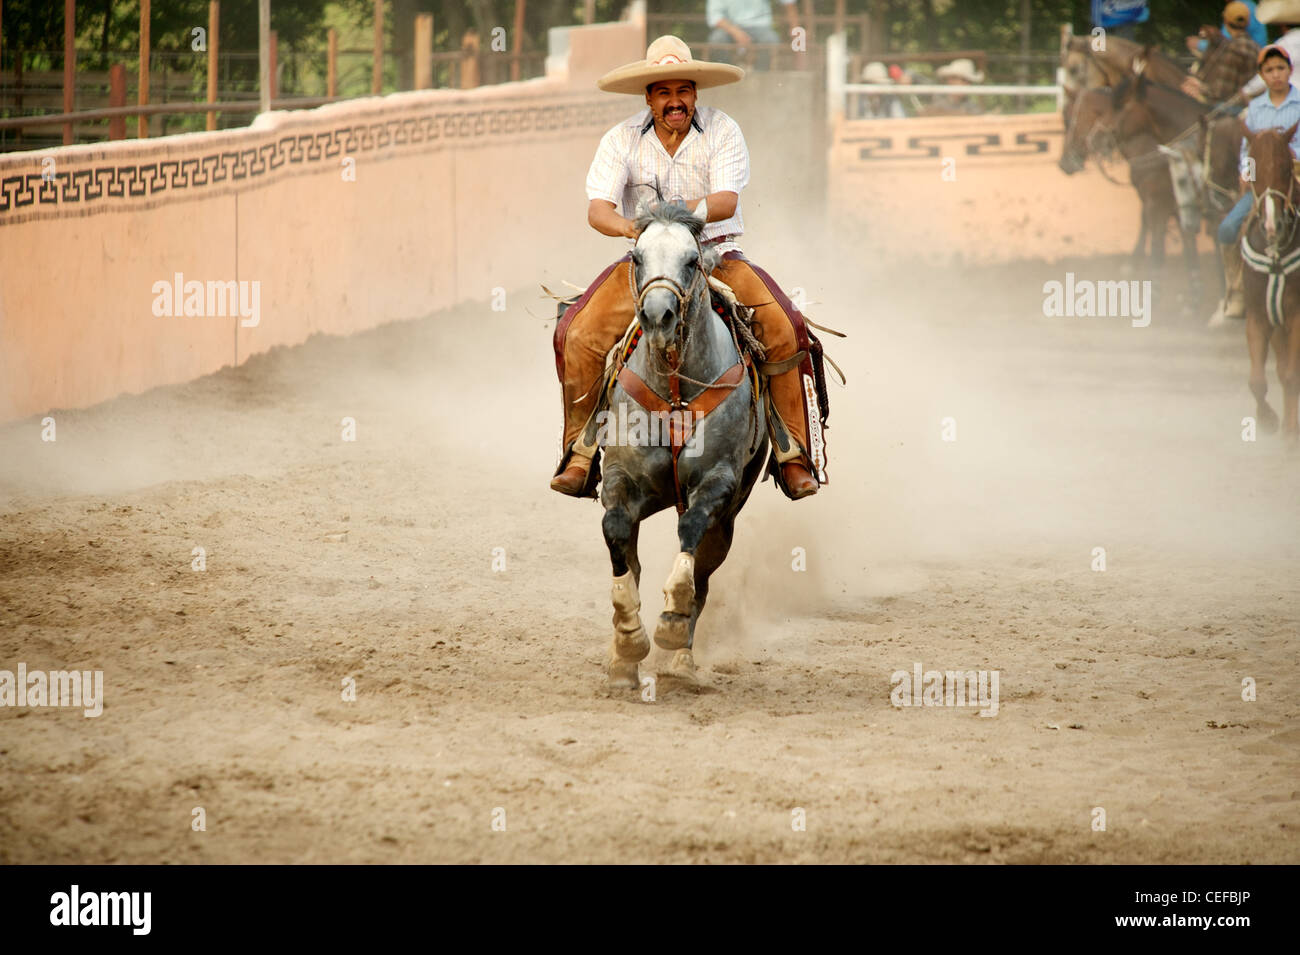 Mexican charros horseman galloping in ring, Texas, US Stock Photo